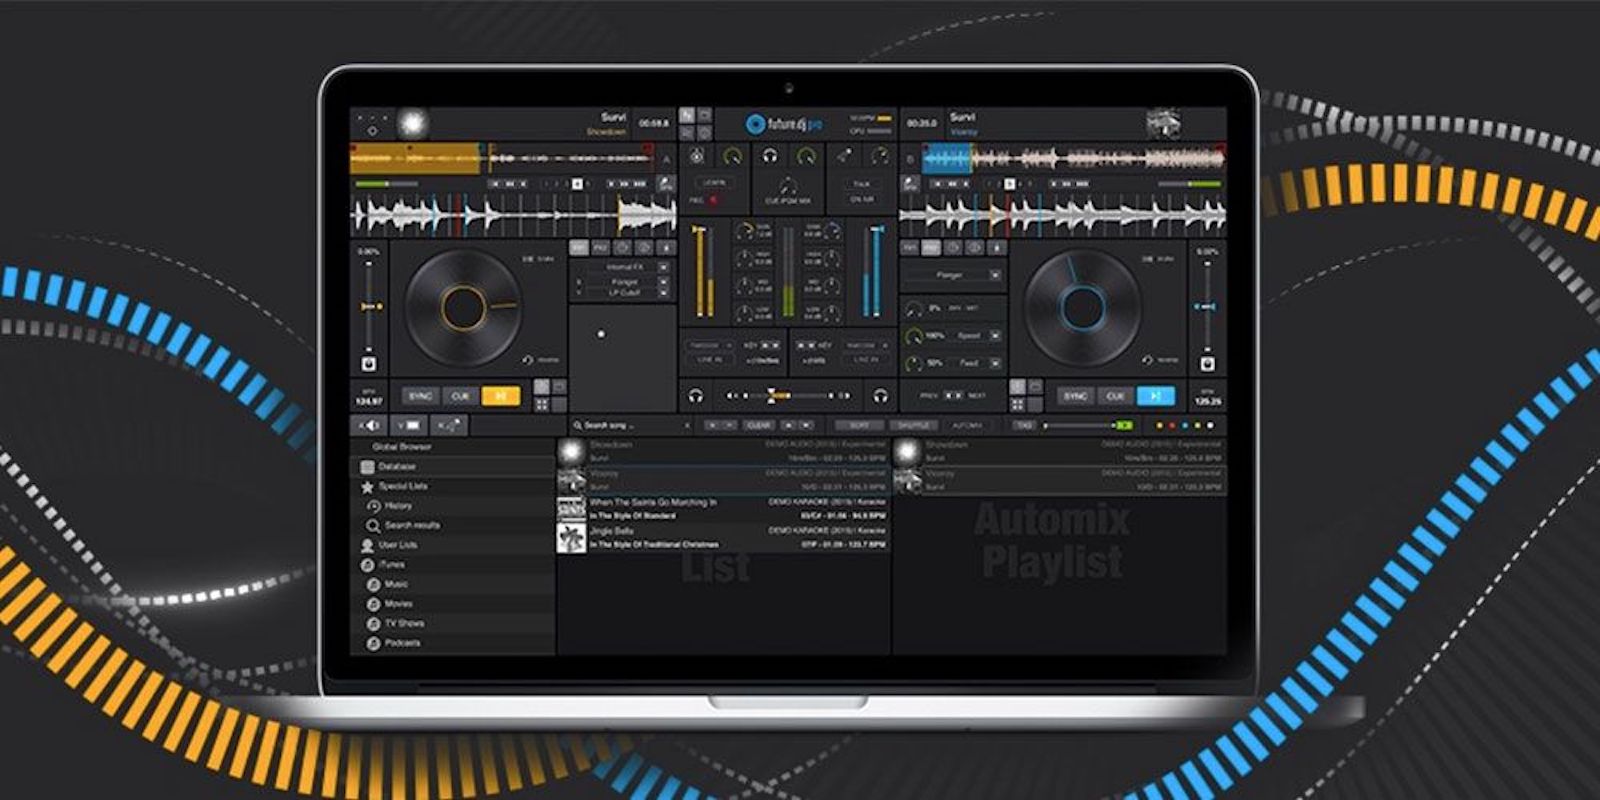 Learn about the endless possibilities of Ableton Live with lessons taught by professional producers and performers.